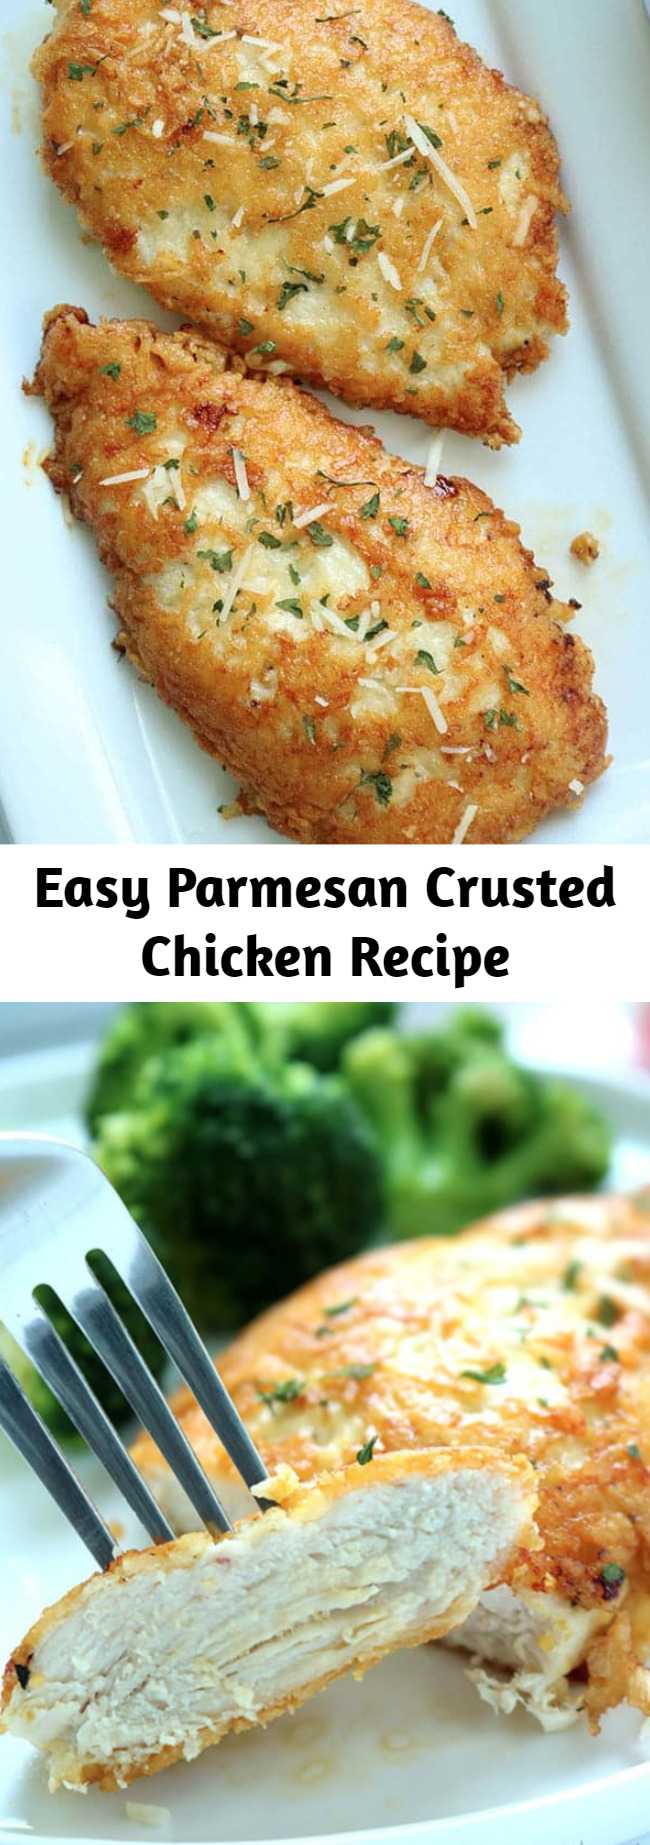 Easy Parmesan Crusted Chicken Recipe - This Parmesan Crusted Chicken is an easy meal idea. We use pounded thin chicken breasts, coat in a delicious Parmesan coating, and then fried to make them crispy. Add this chicken idea to your dinner this week.